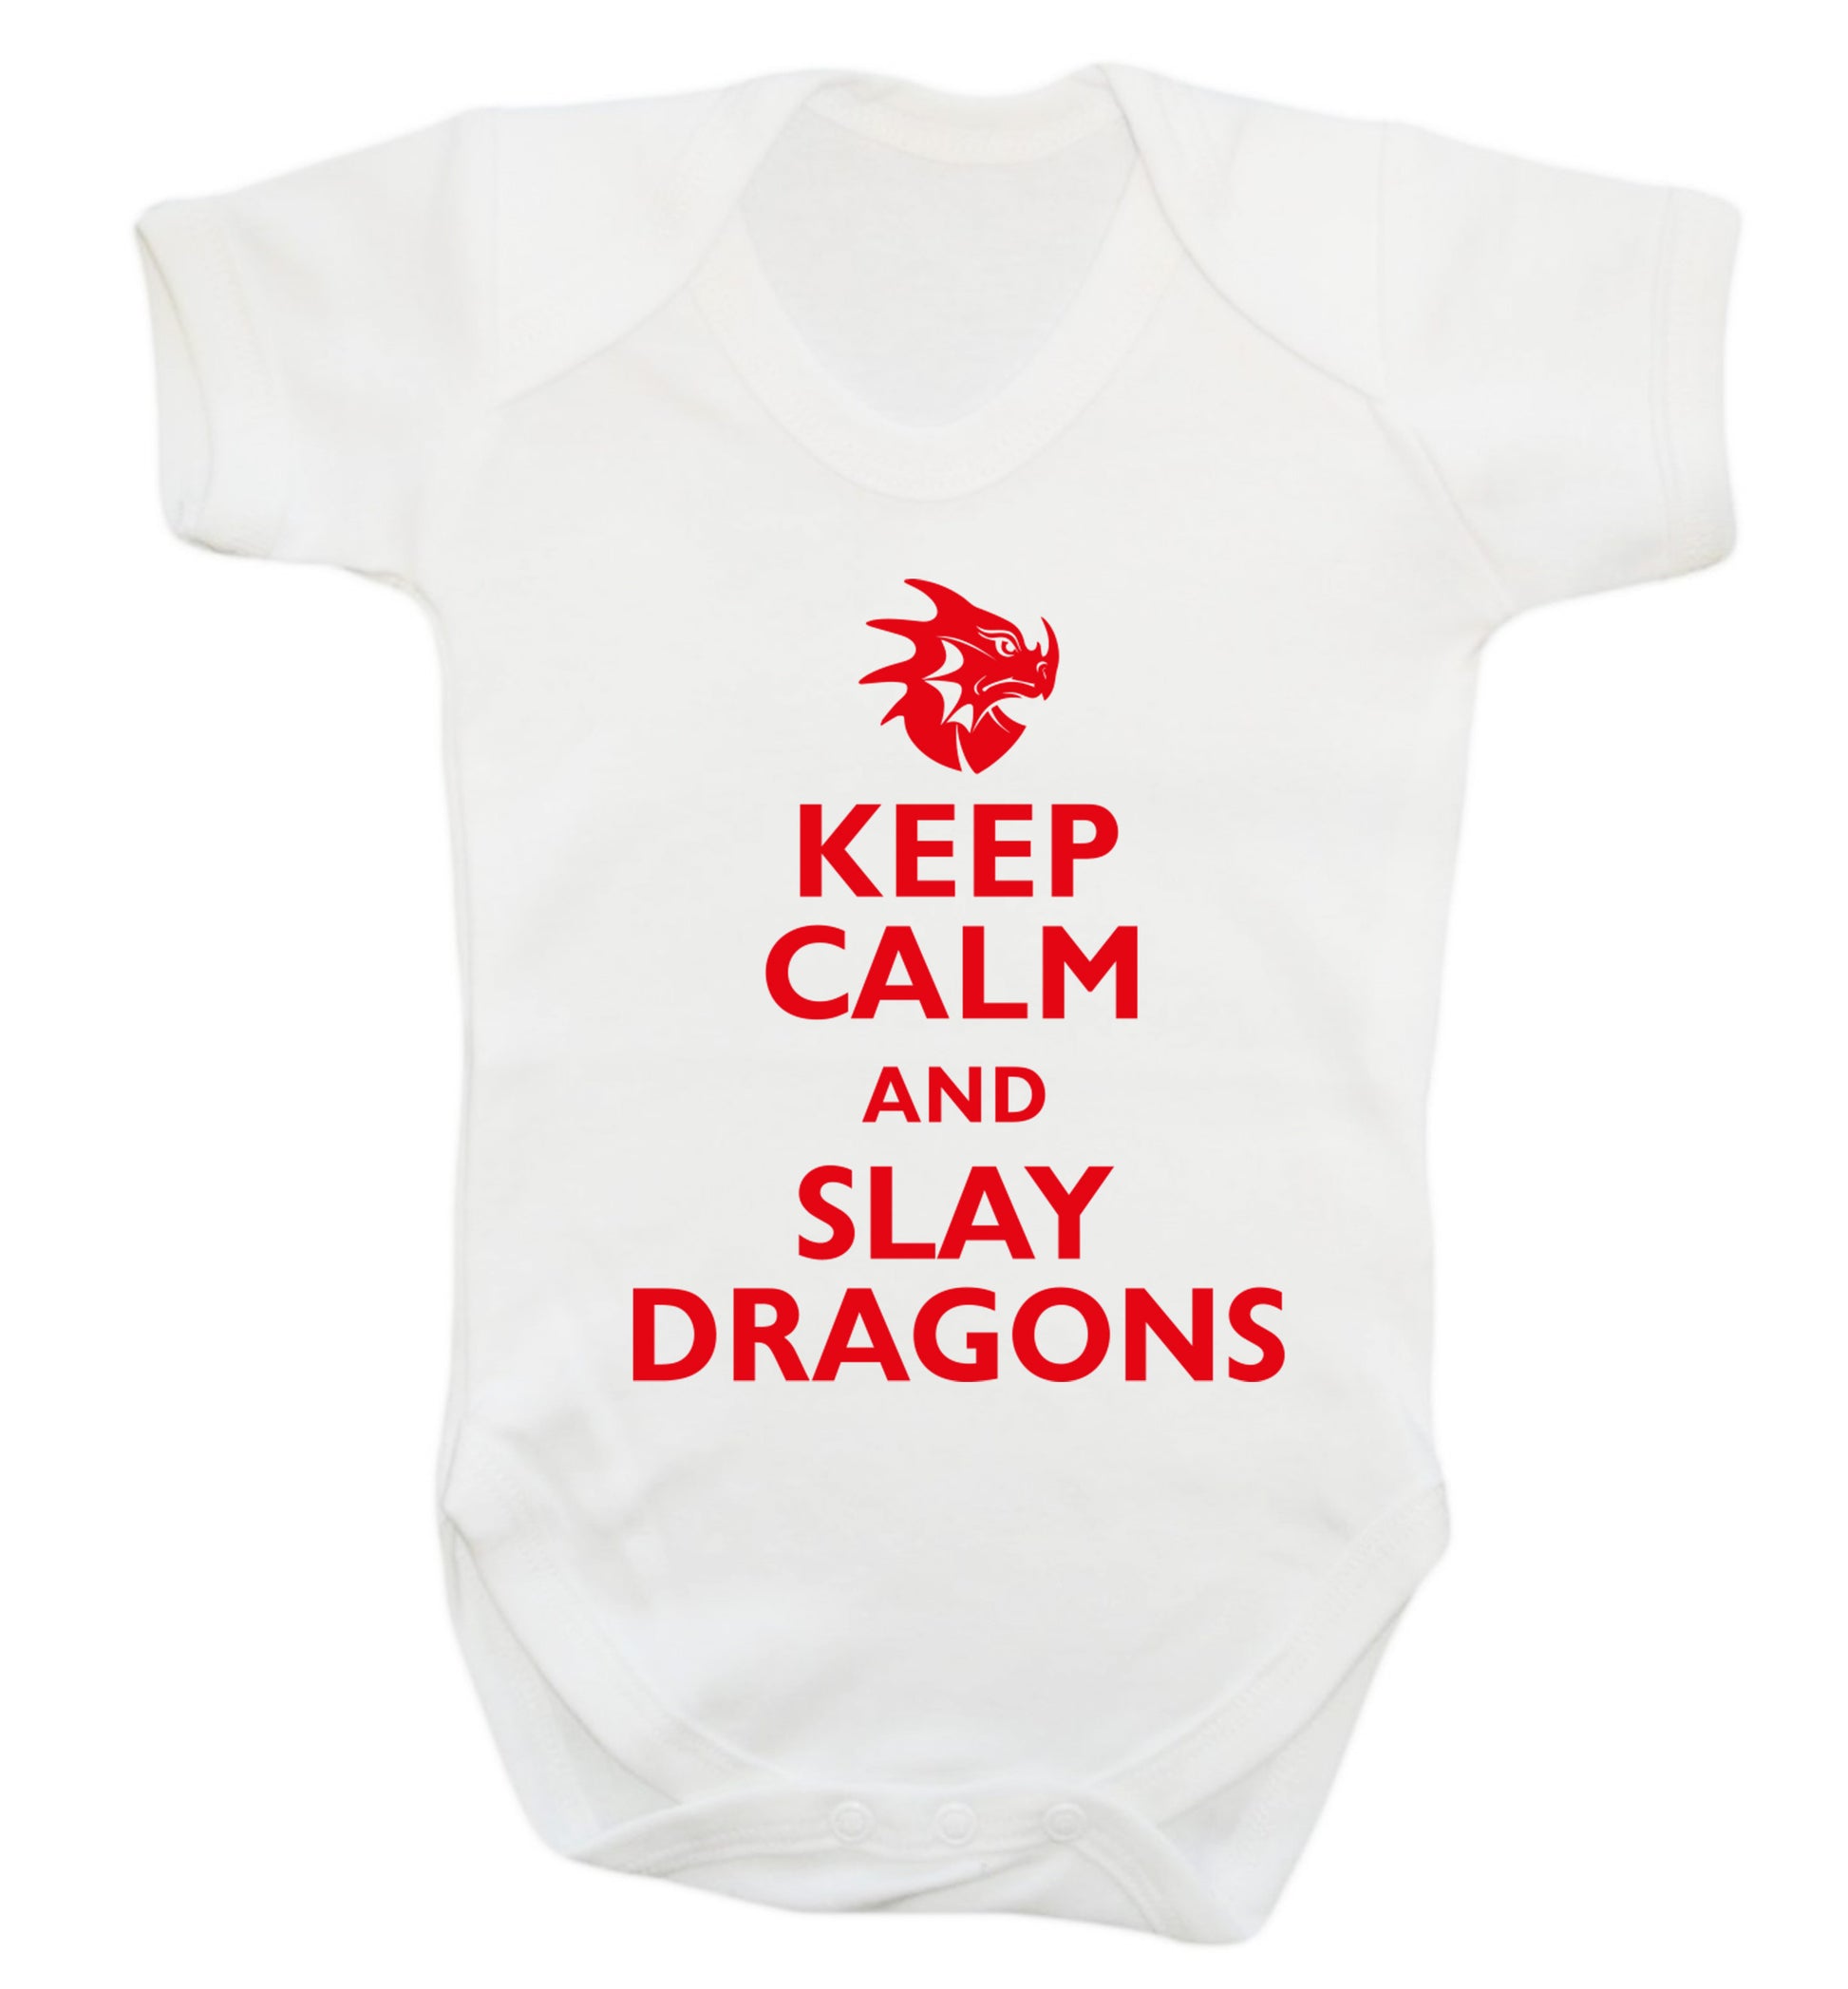 Keep calm and slay dragons Baby Vest white 18-24 months